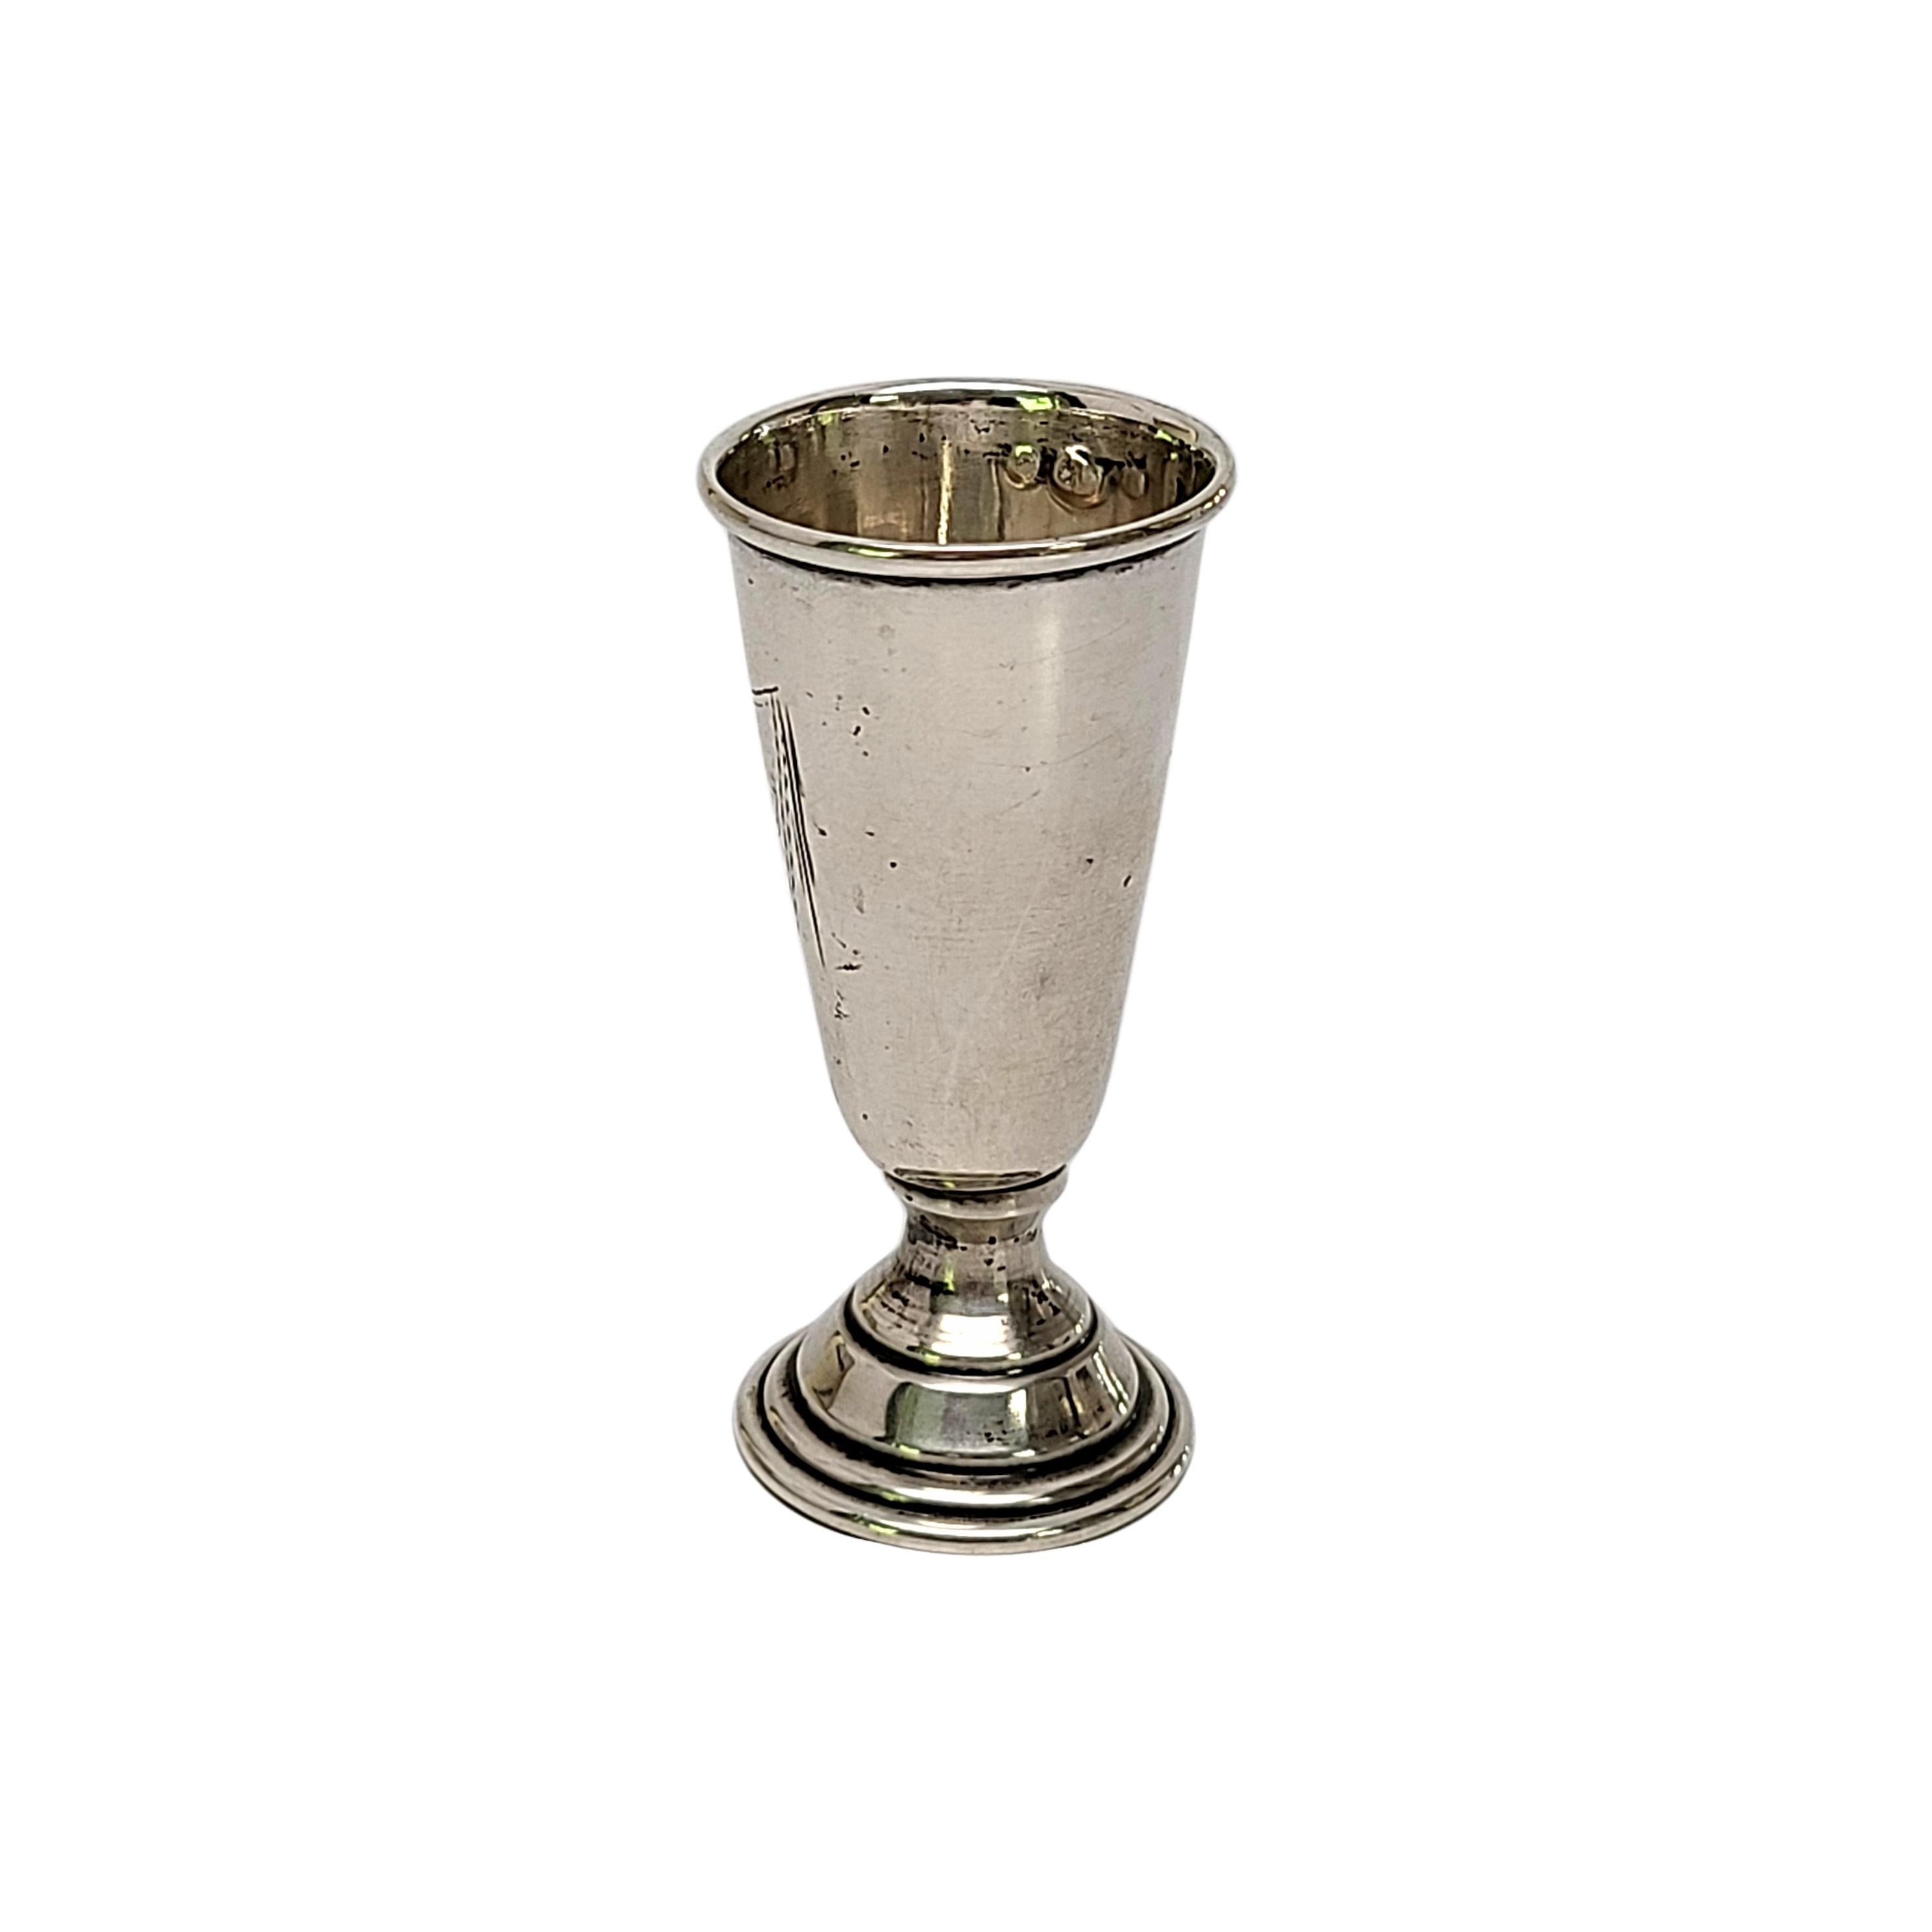 800 silver kiddush cup or shot glass.

Small cup with etched shield and engraved with Hebrew letters.

Measures 2 1/2